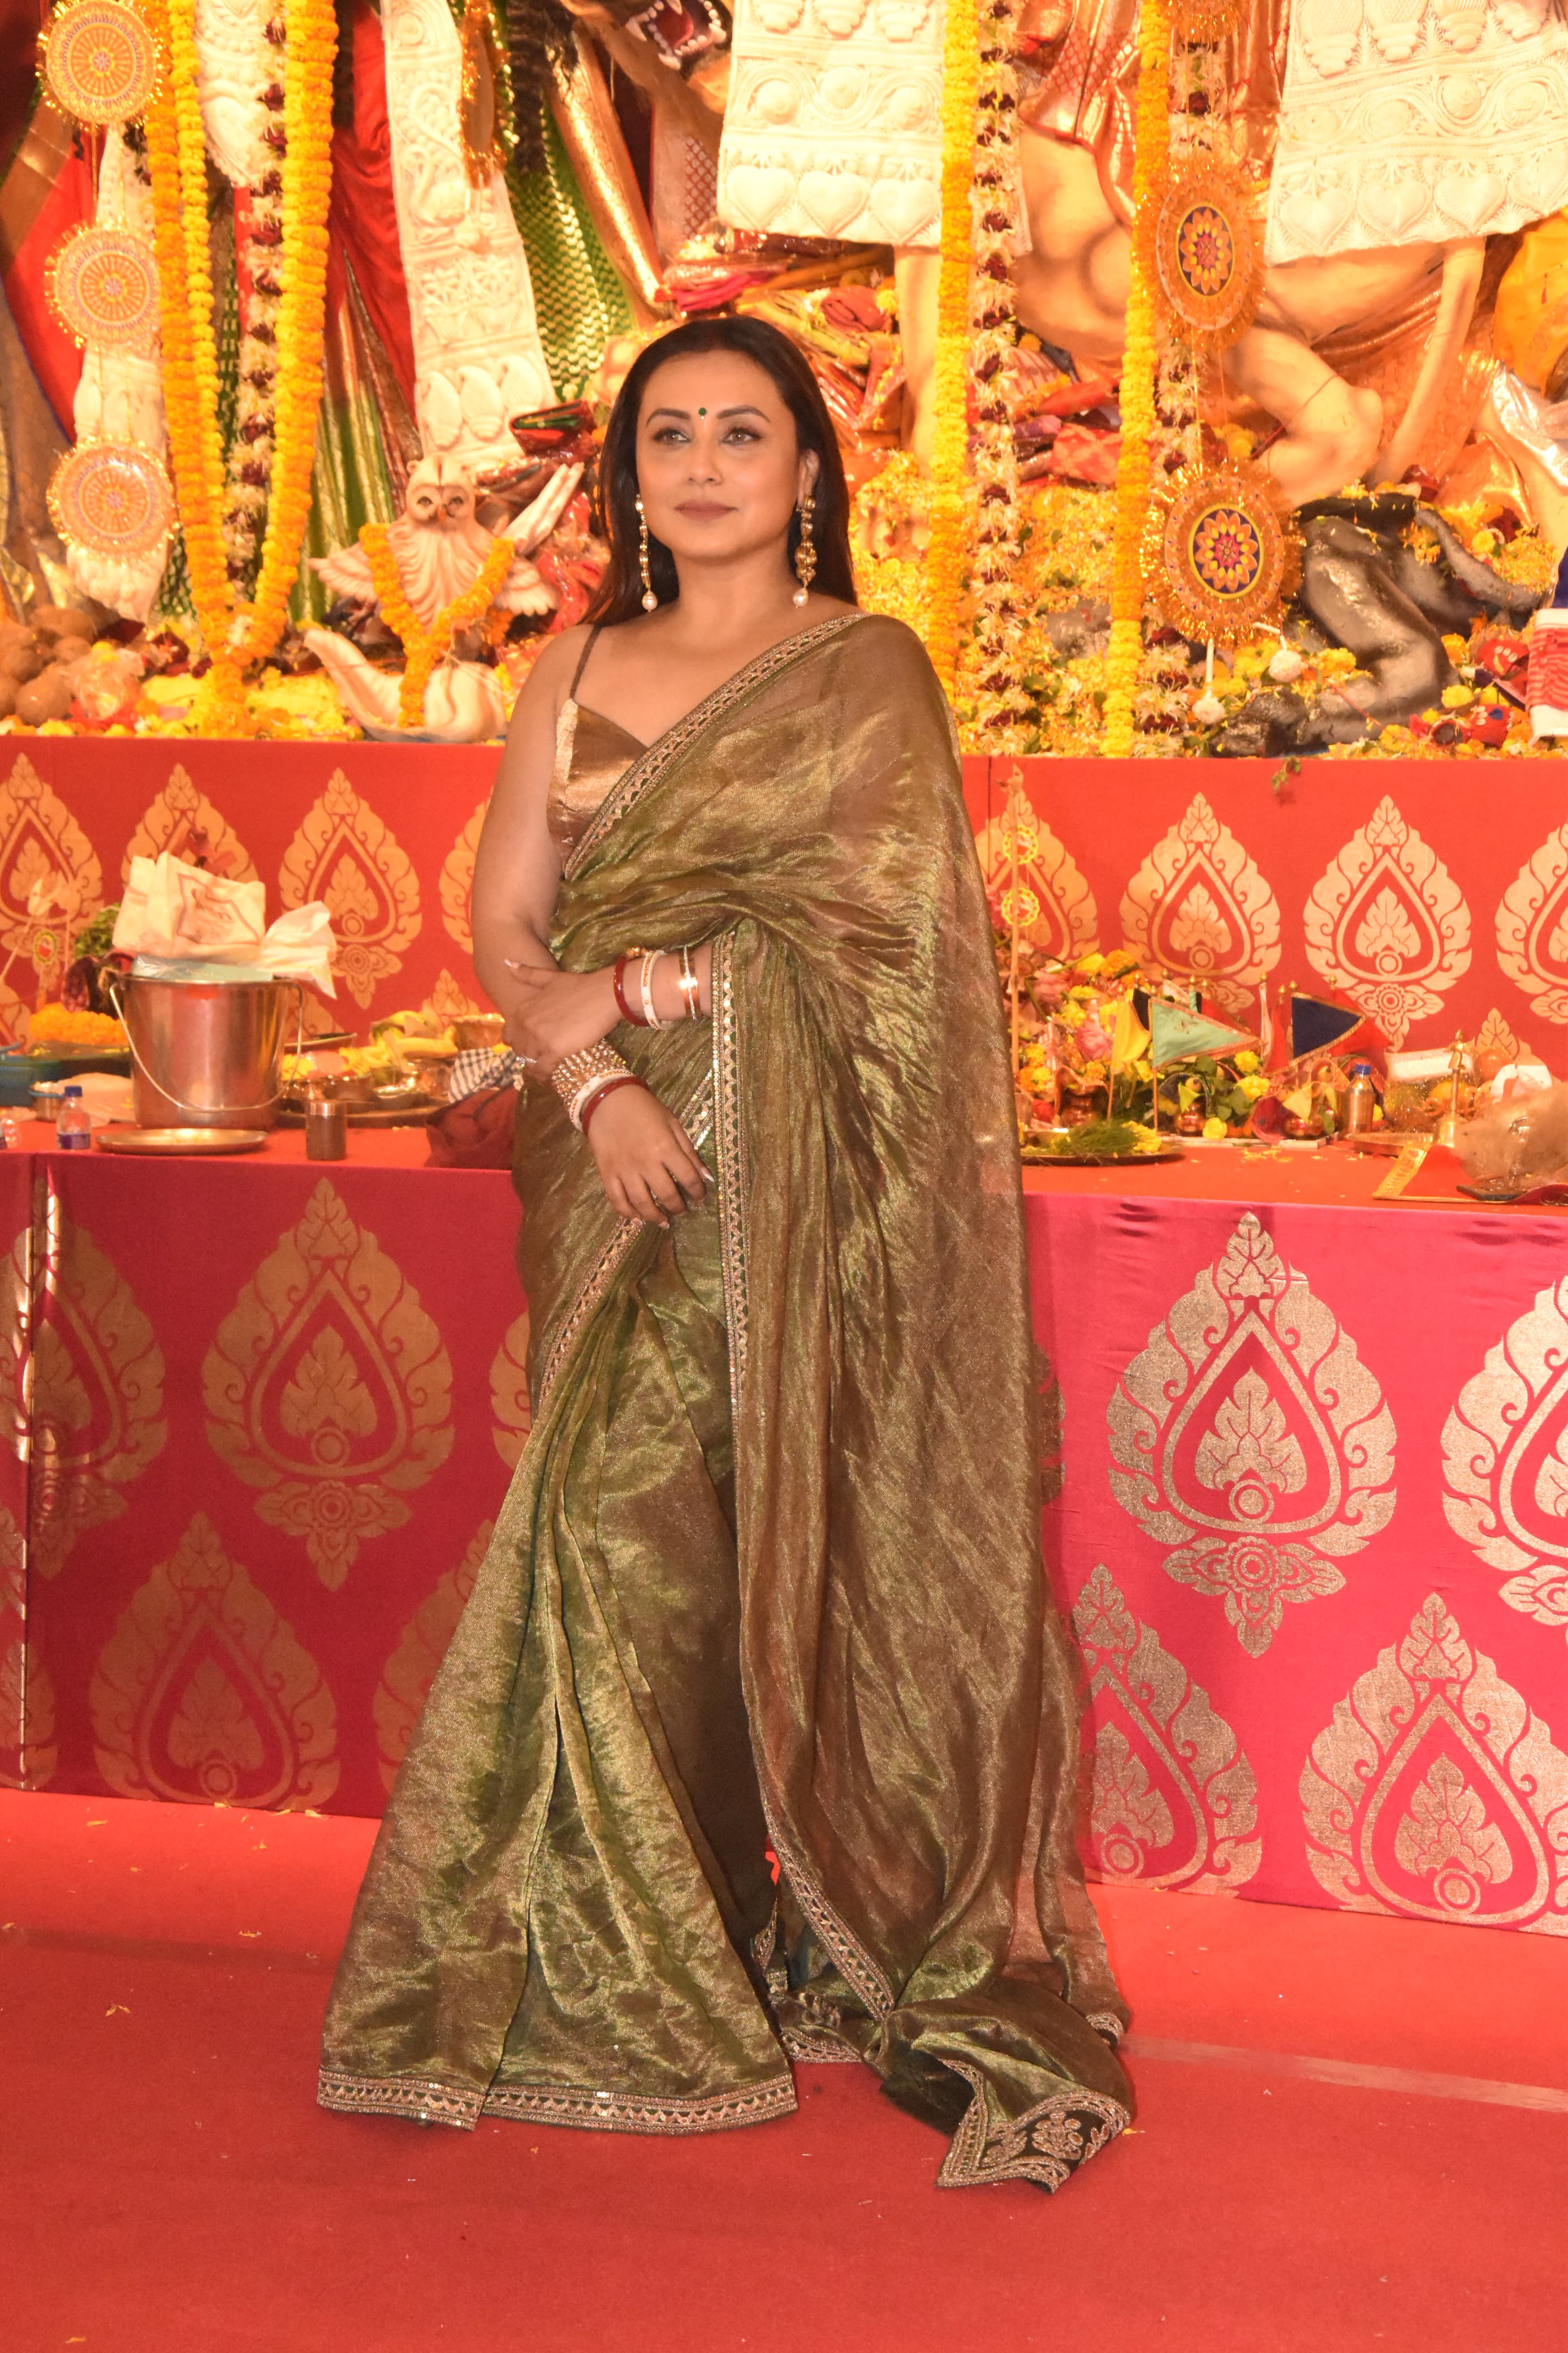 The actress was spotted in an elegant saree as she sought the blessings of Durga on Ashtami